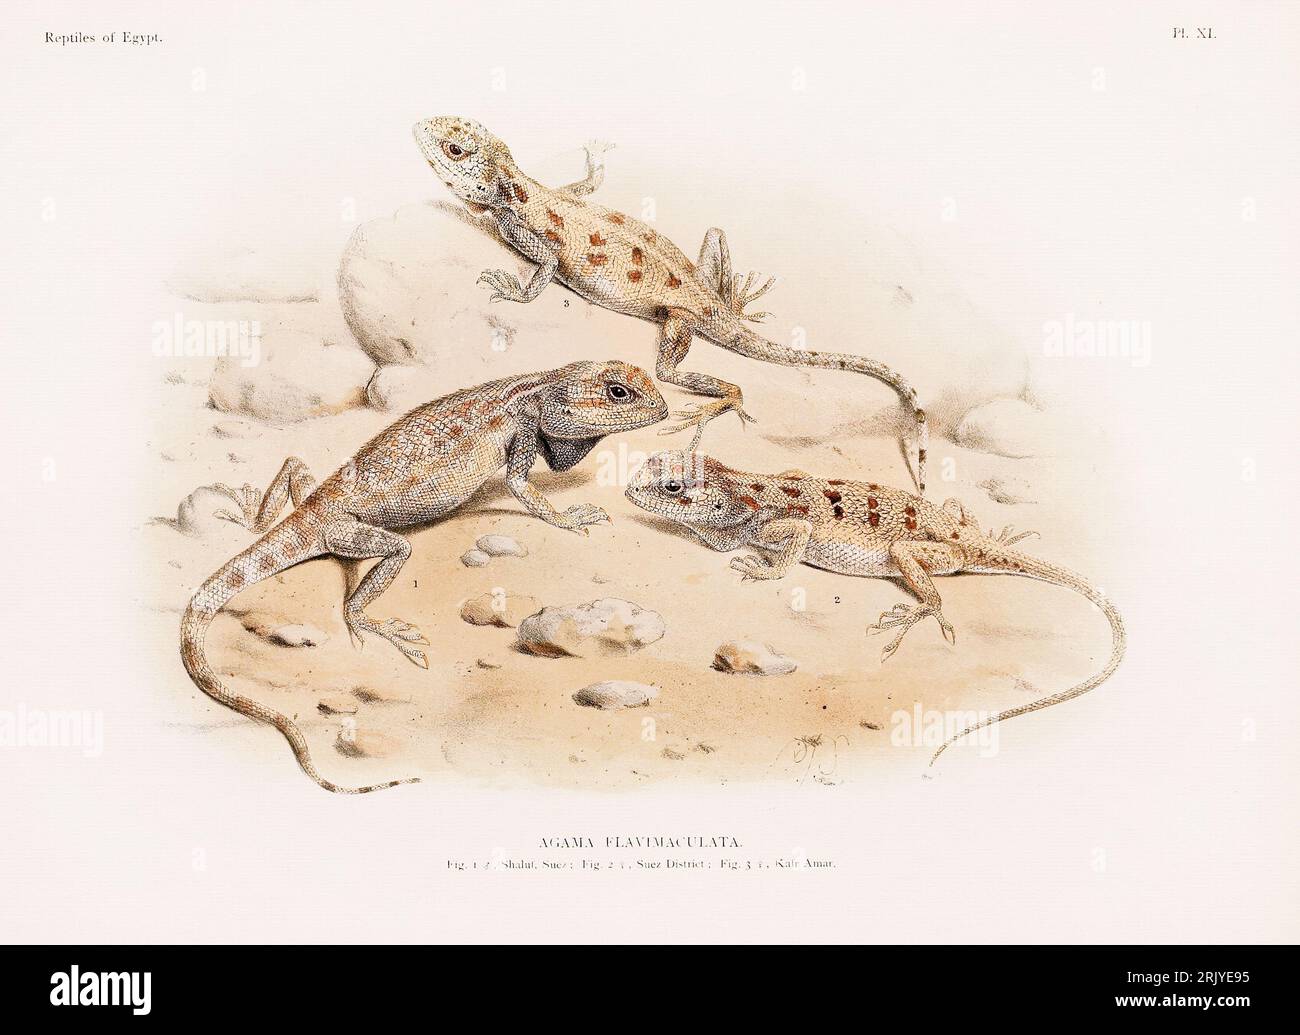 Scientific illustration from a late 19th-century book showcasing reptiles, specifically focused on the Northern African zoology. Stock Photo